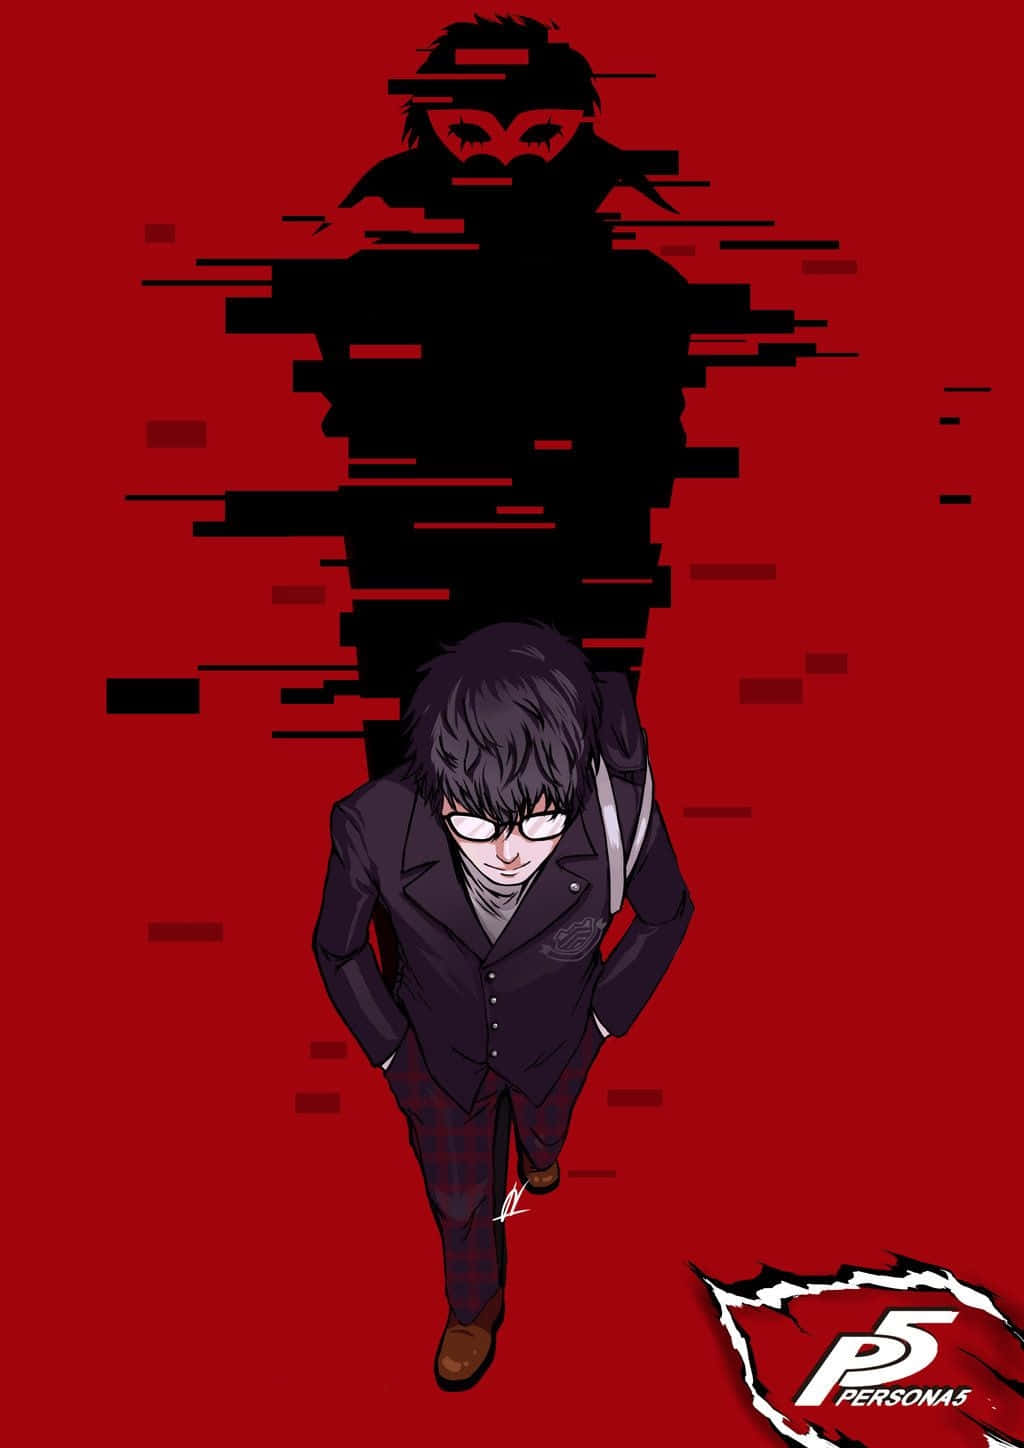 Become Wild Card with Joker, the Protagonist of Persona 5 Wallpaper